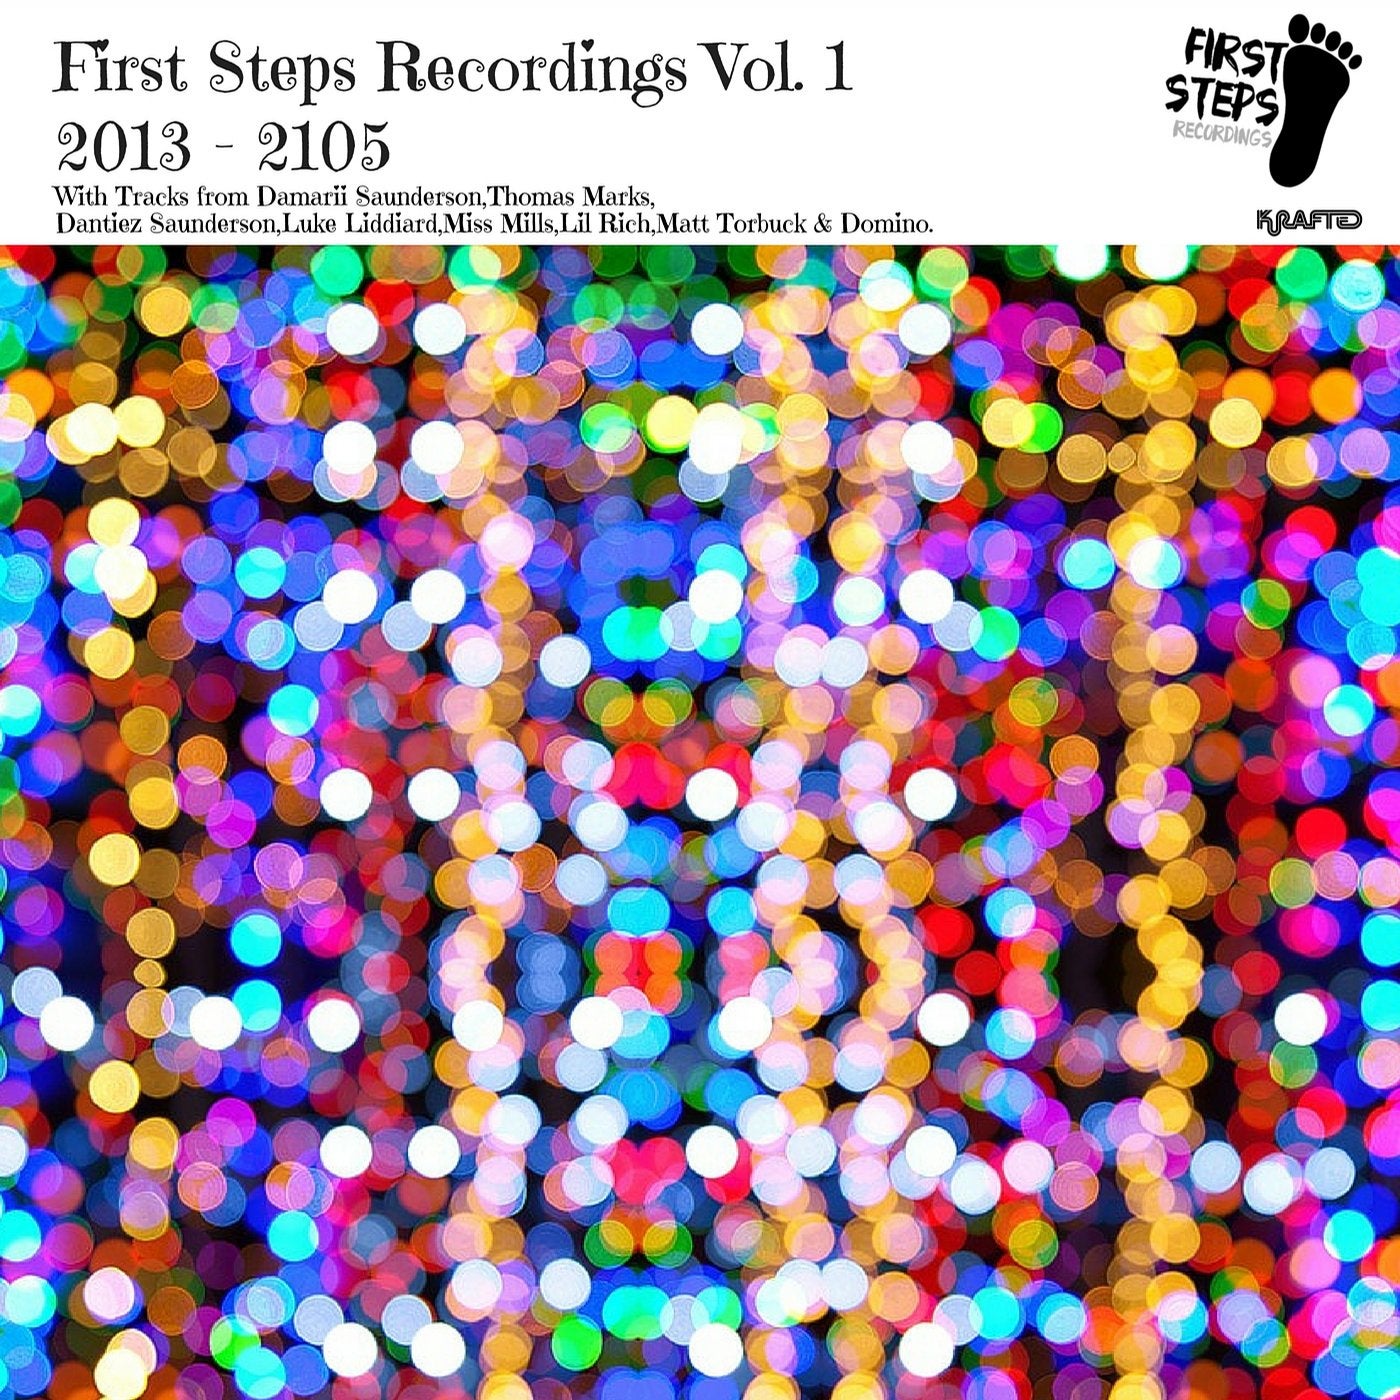 First Steps Recordings Vol.1 (2013 - 2015)